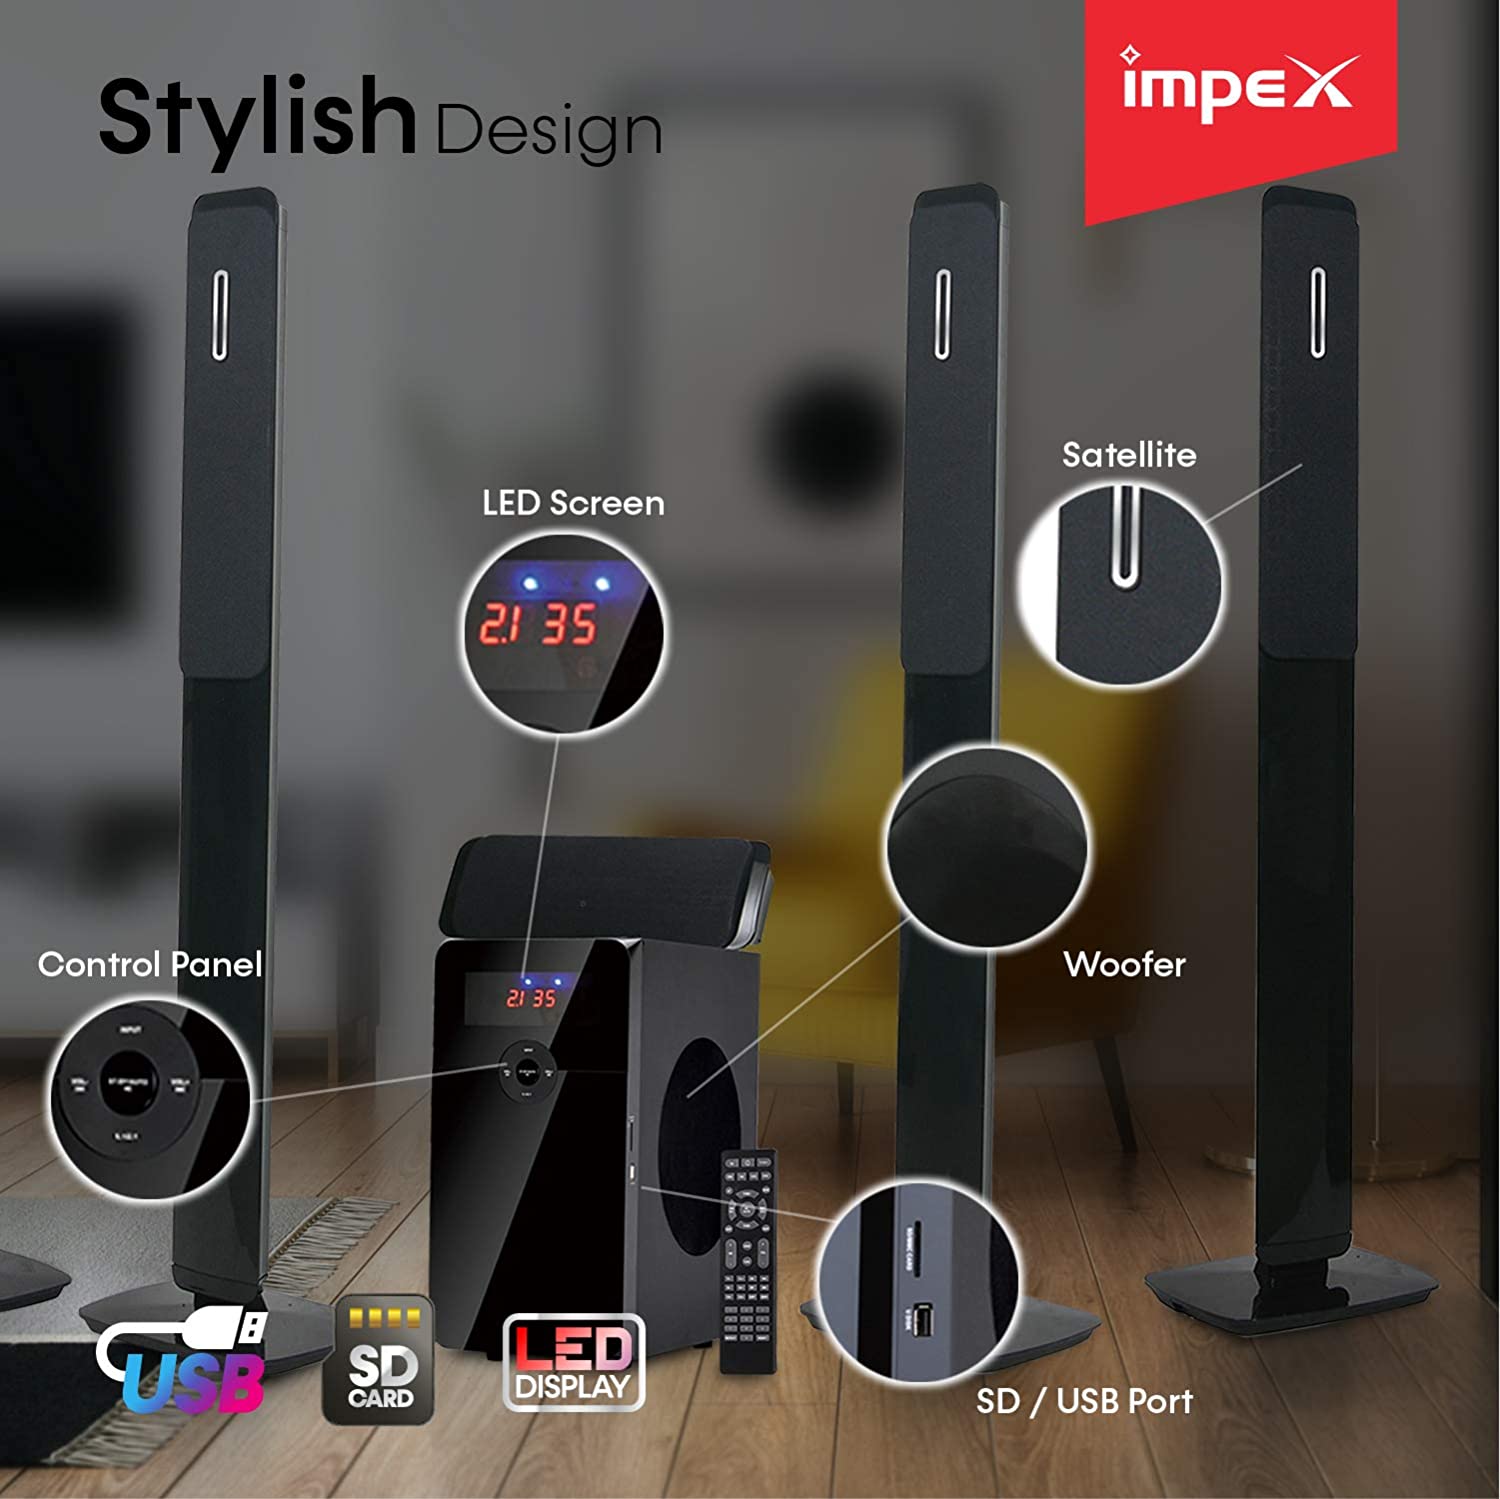 Impex HT 5105 40W Subwoofer Wooden ABS Covered Black 5.1 Channel Multimedia Home theatre Speaker System with Remote Control BT/FM Radio/USB/MP3/SD/AUX